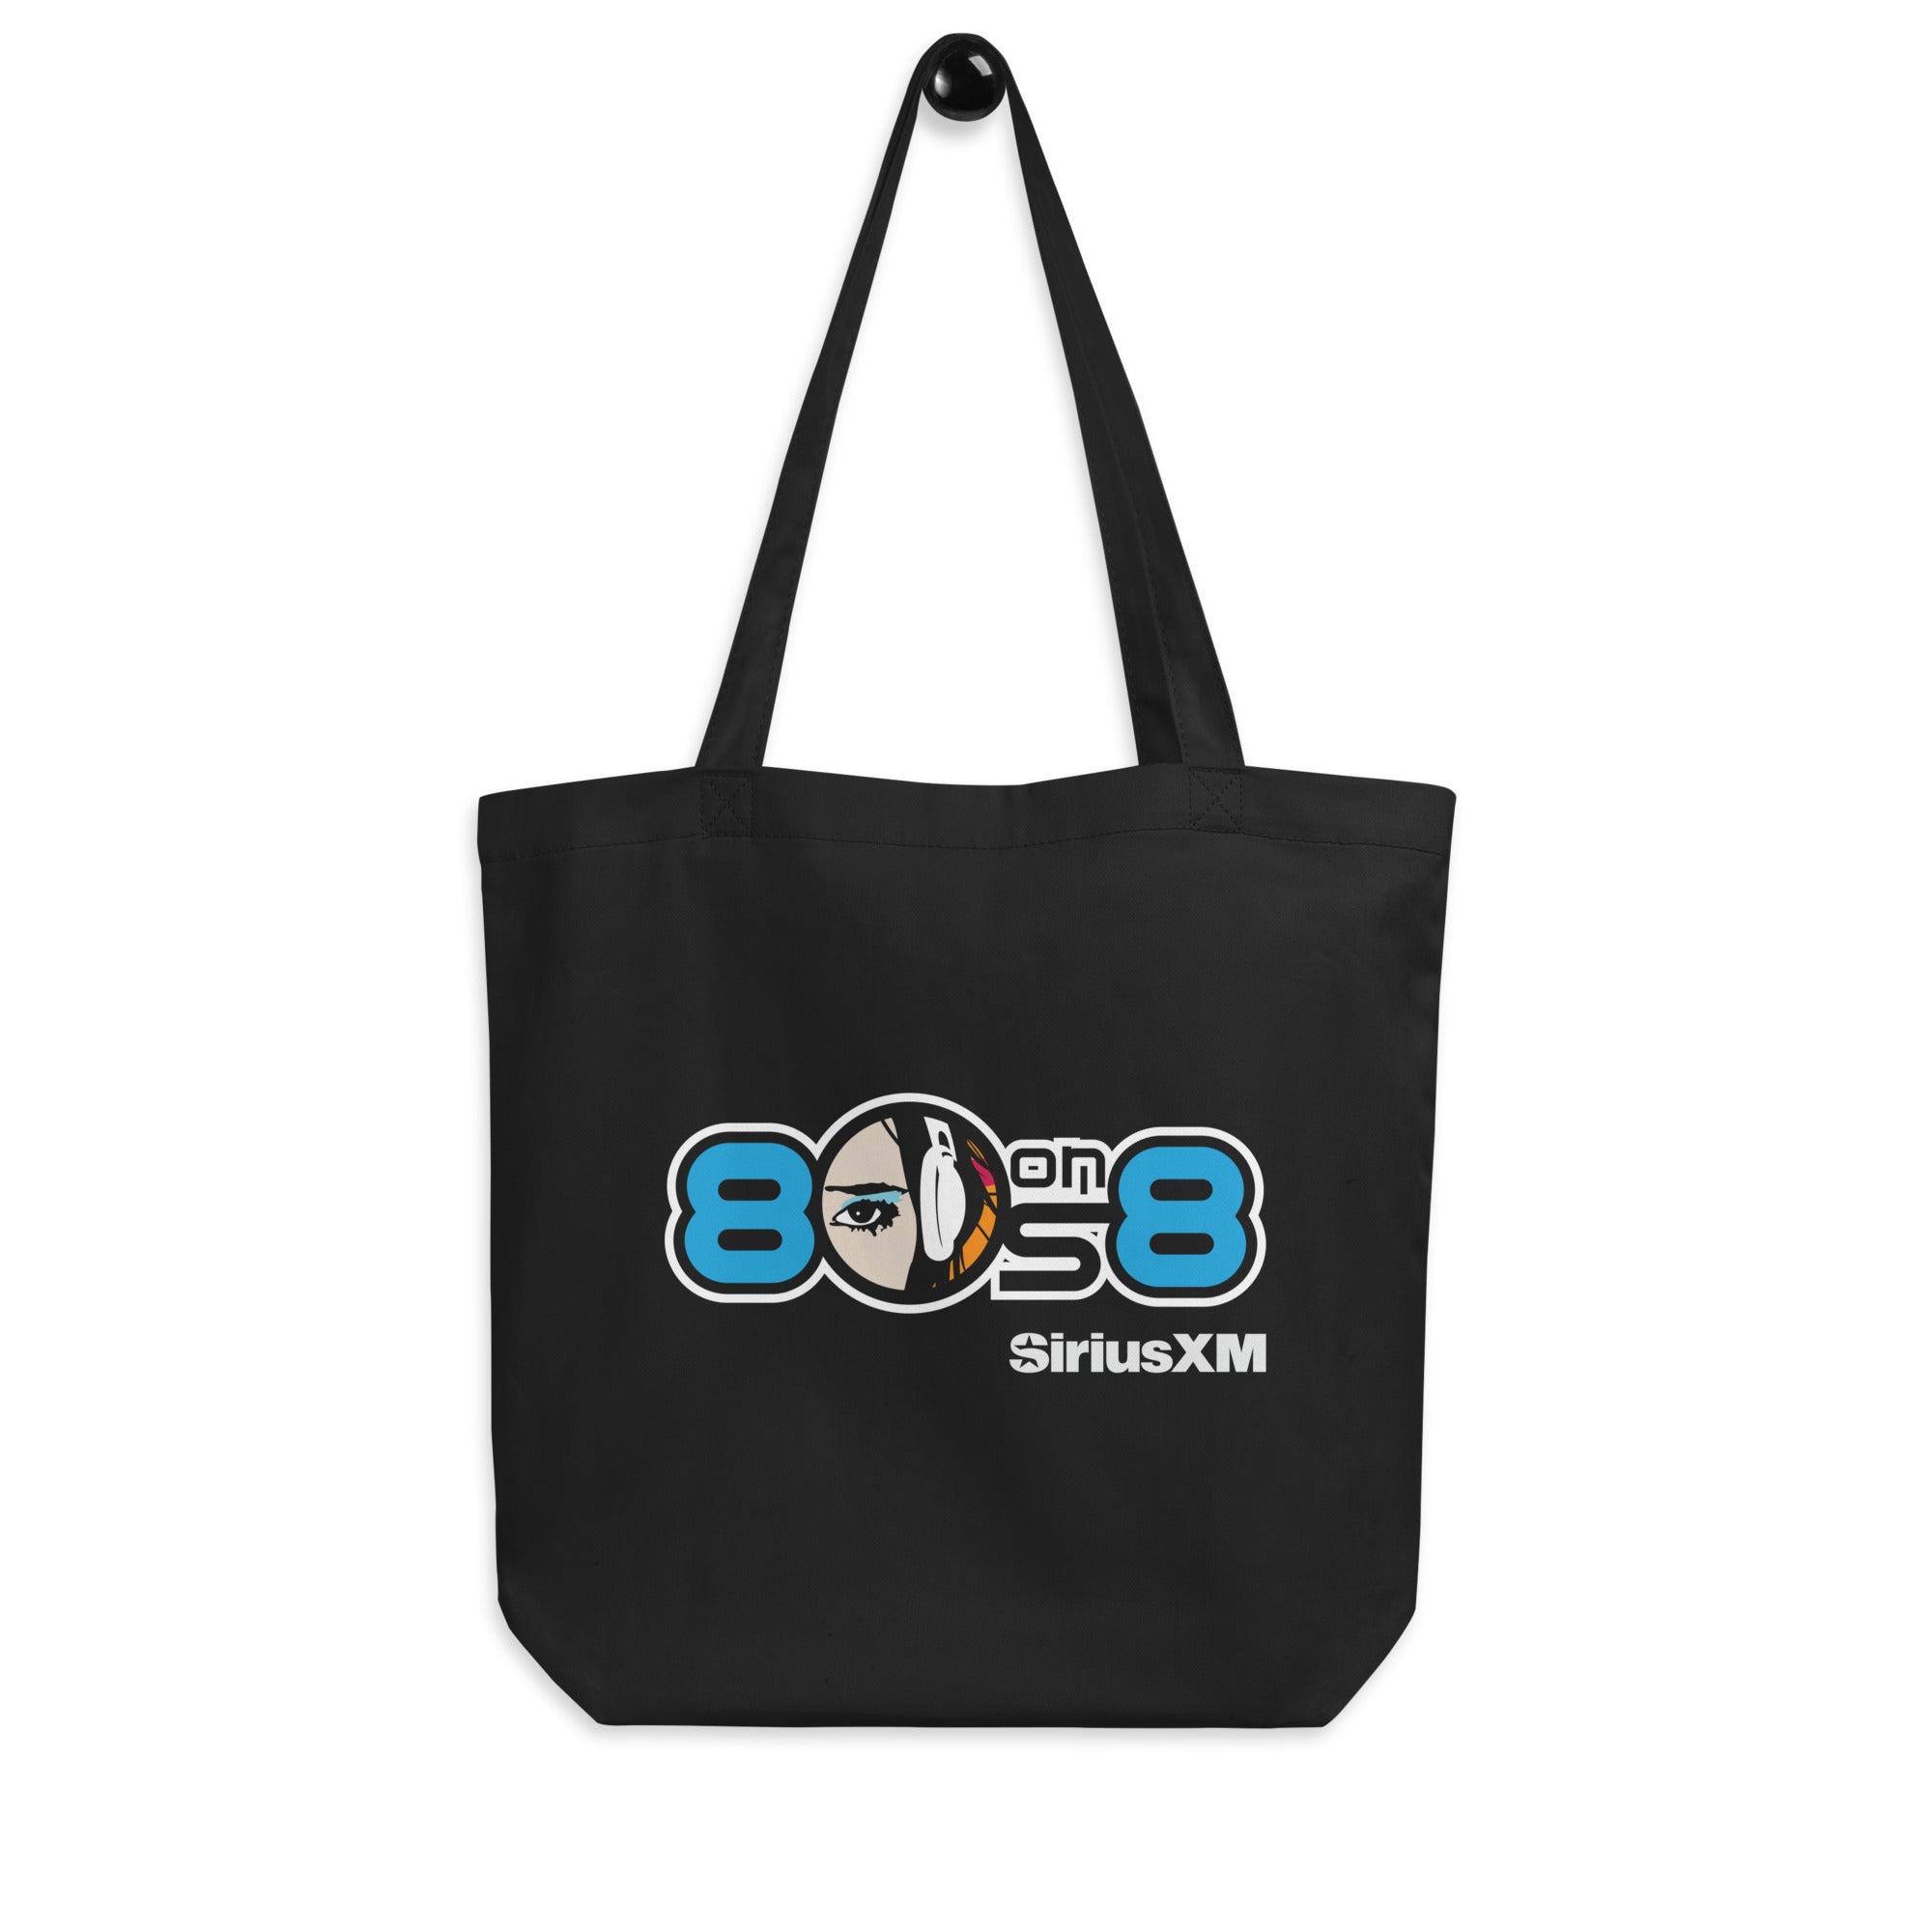 80s on 8: Eco Tote